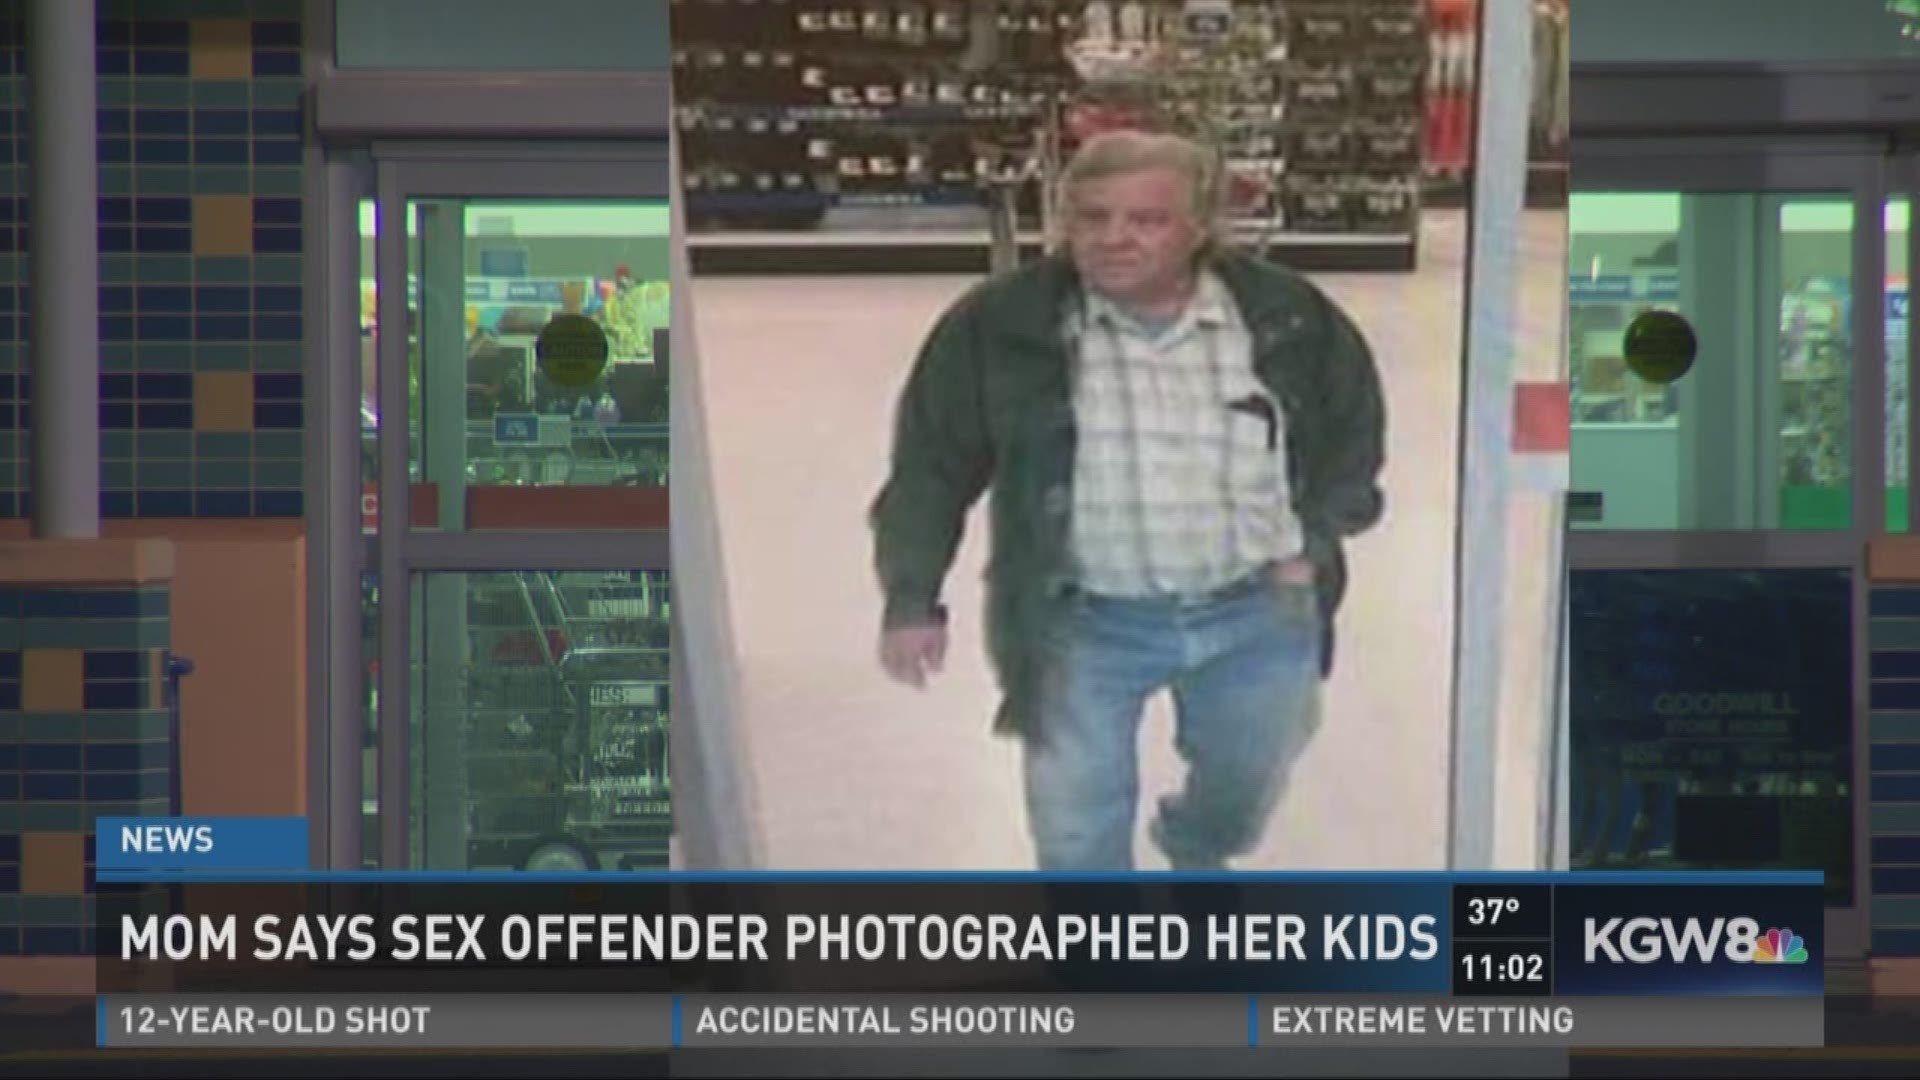 Mom says sex offender photographed her kids